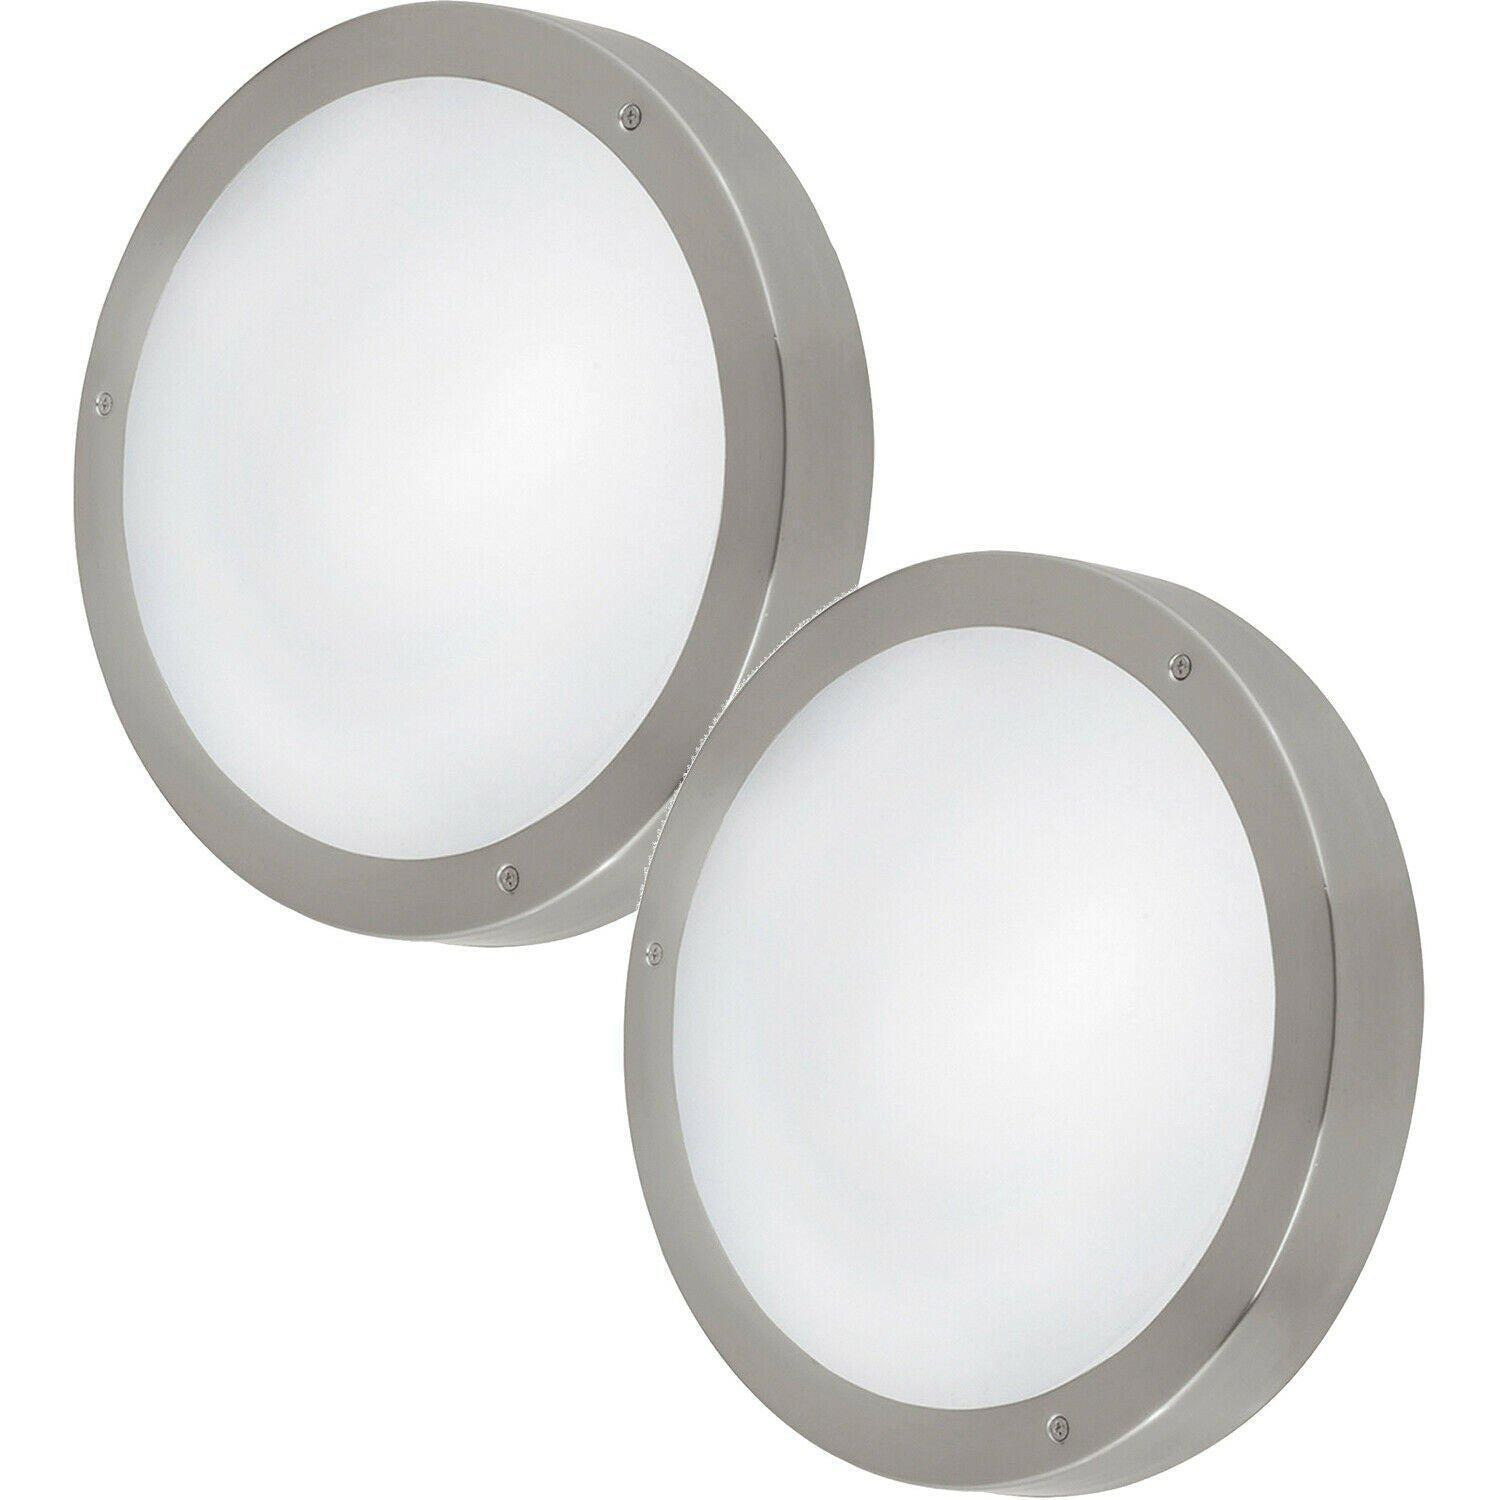 2 PACK IP44 Outdoor Wall Light Round Stainless Steel 11W LED Porch Lamp - image 1